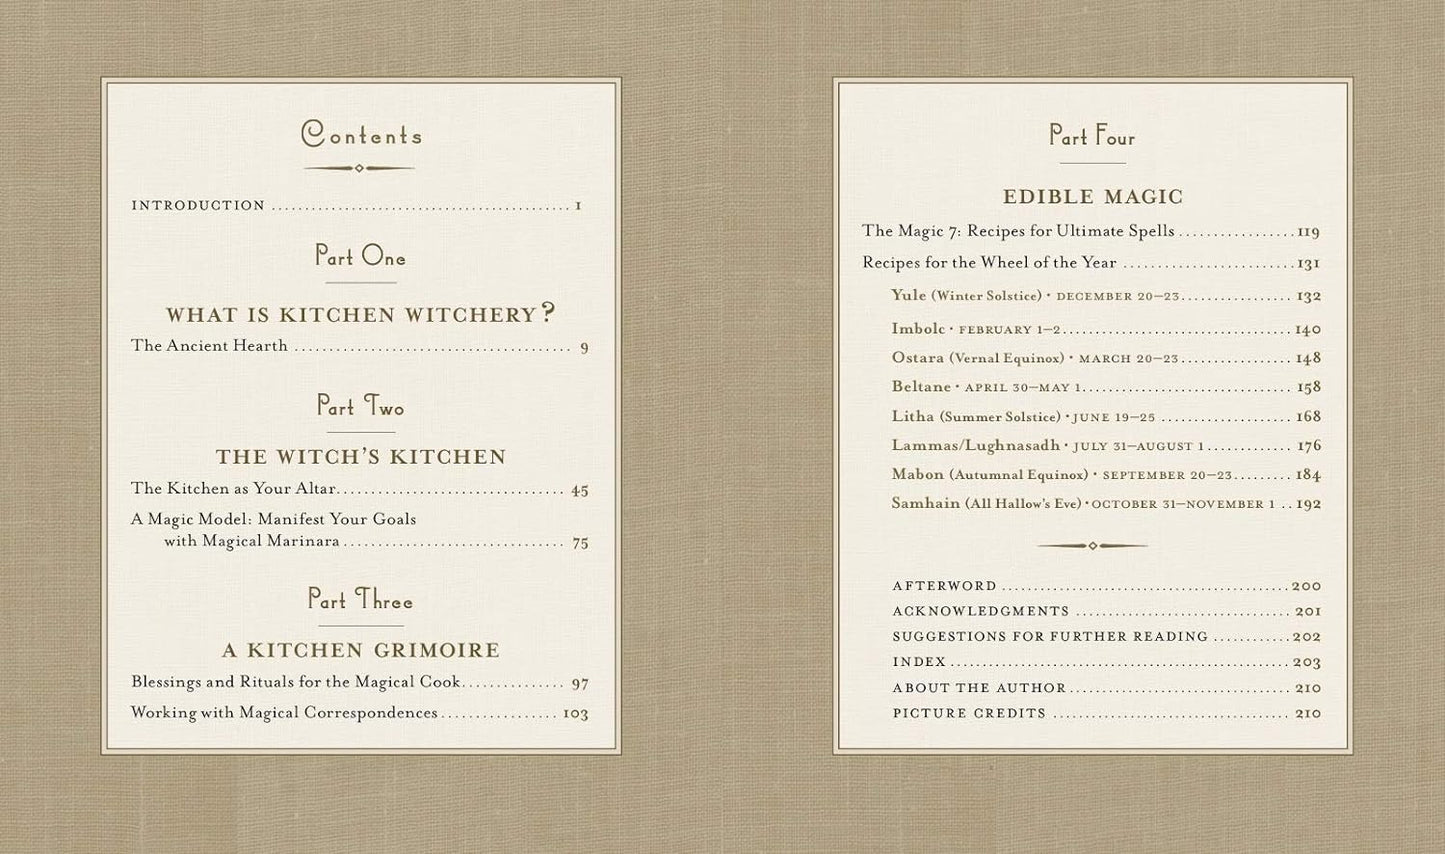 A two-page spread from the book, with gold text listing the table of contents.